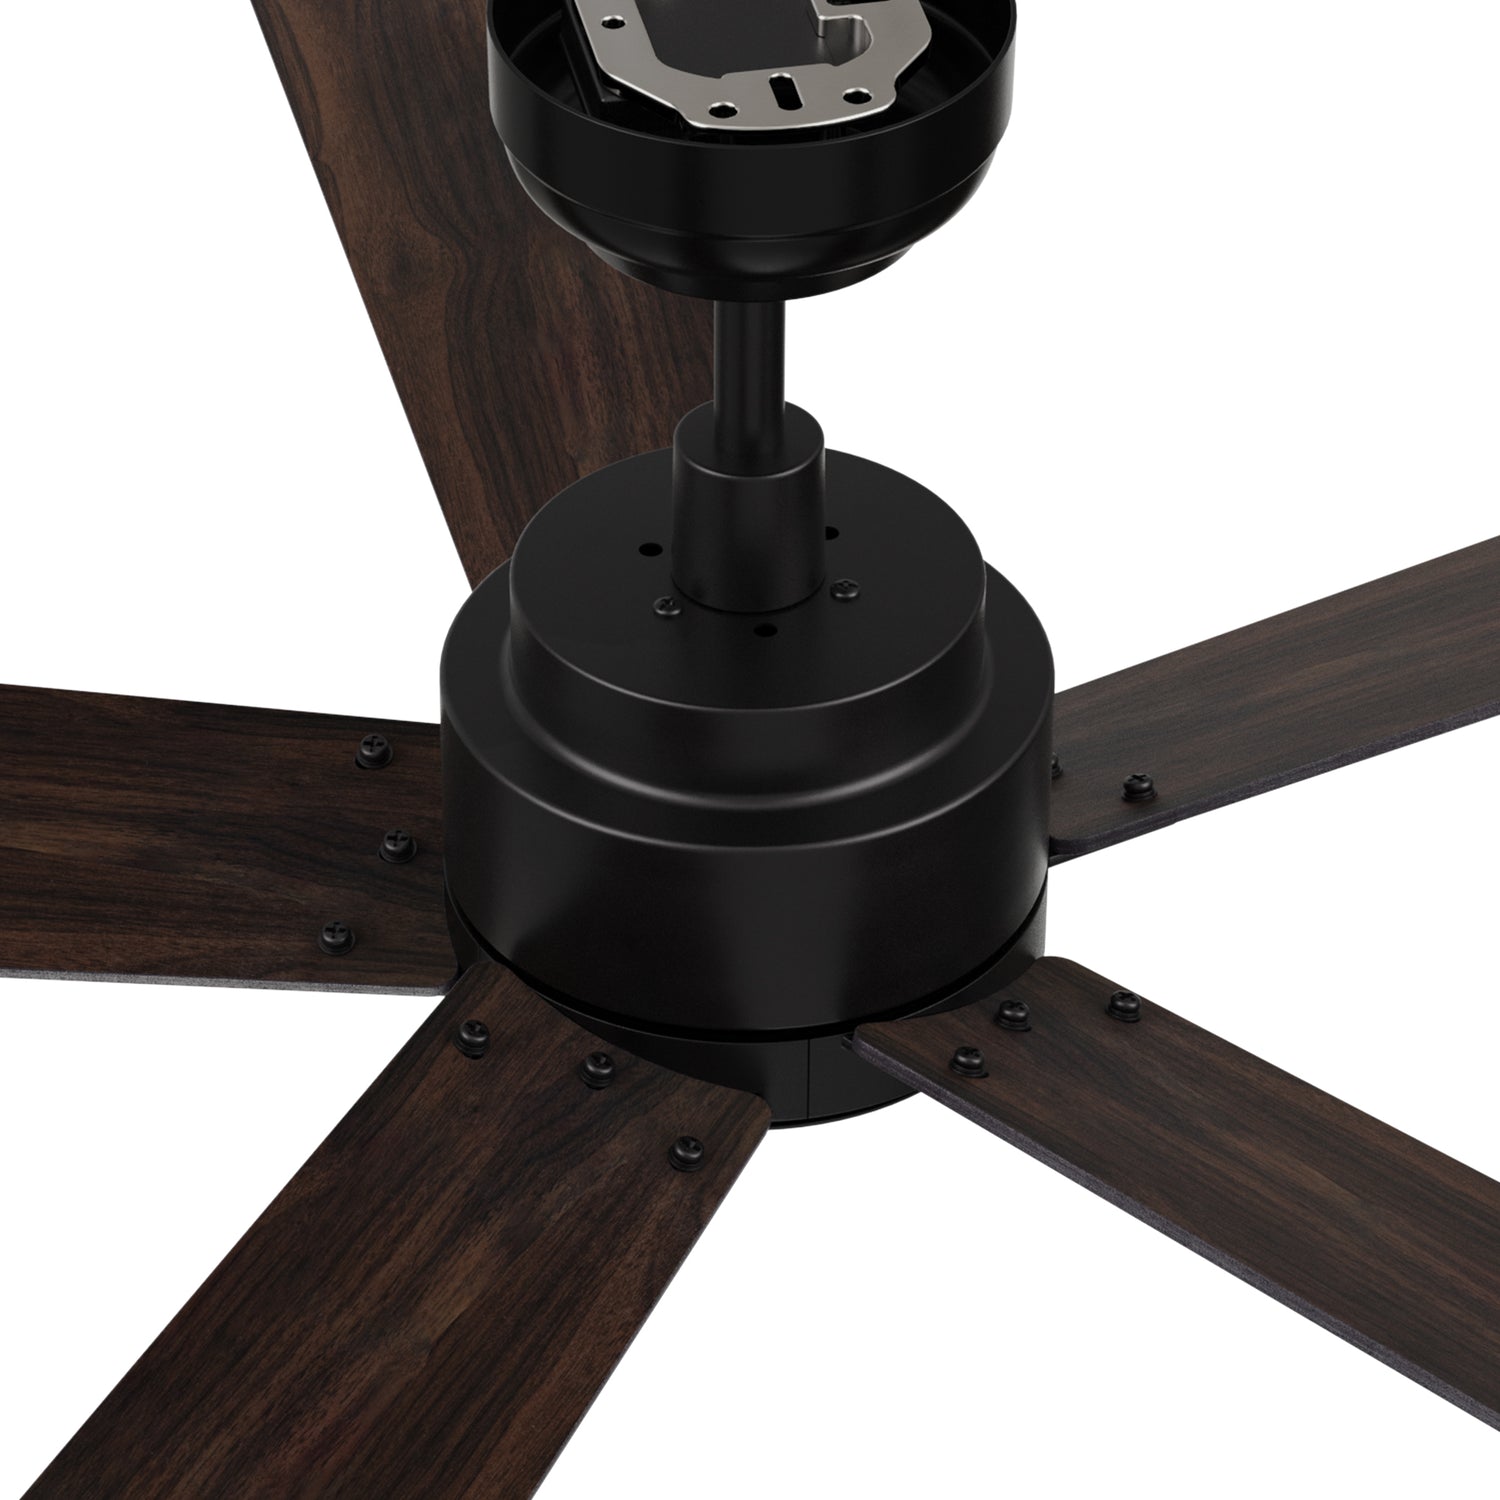 Carro Welland 60 inch remote control ceiling fans with reversible fan blades 